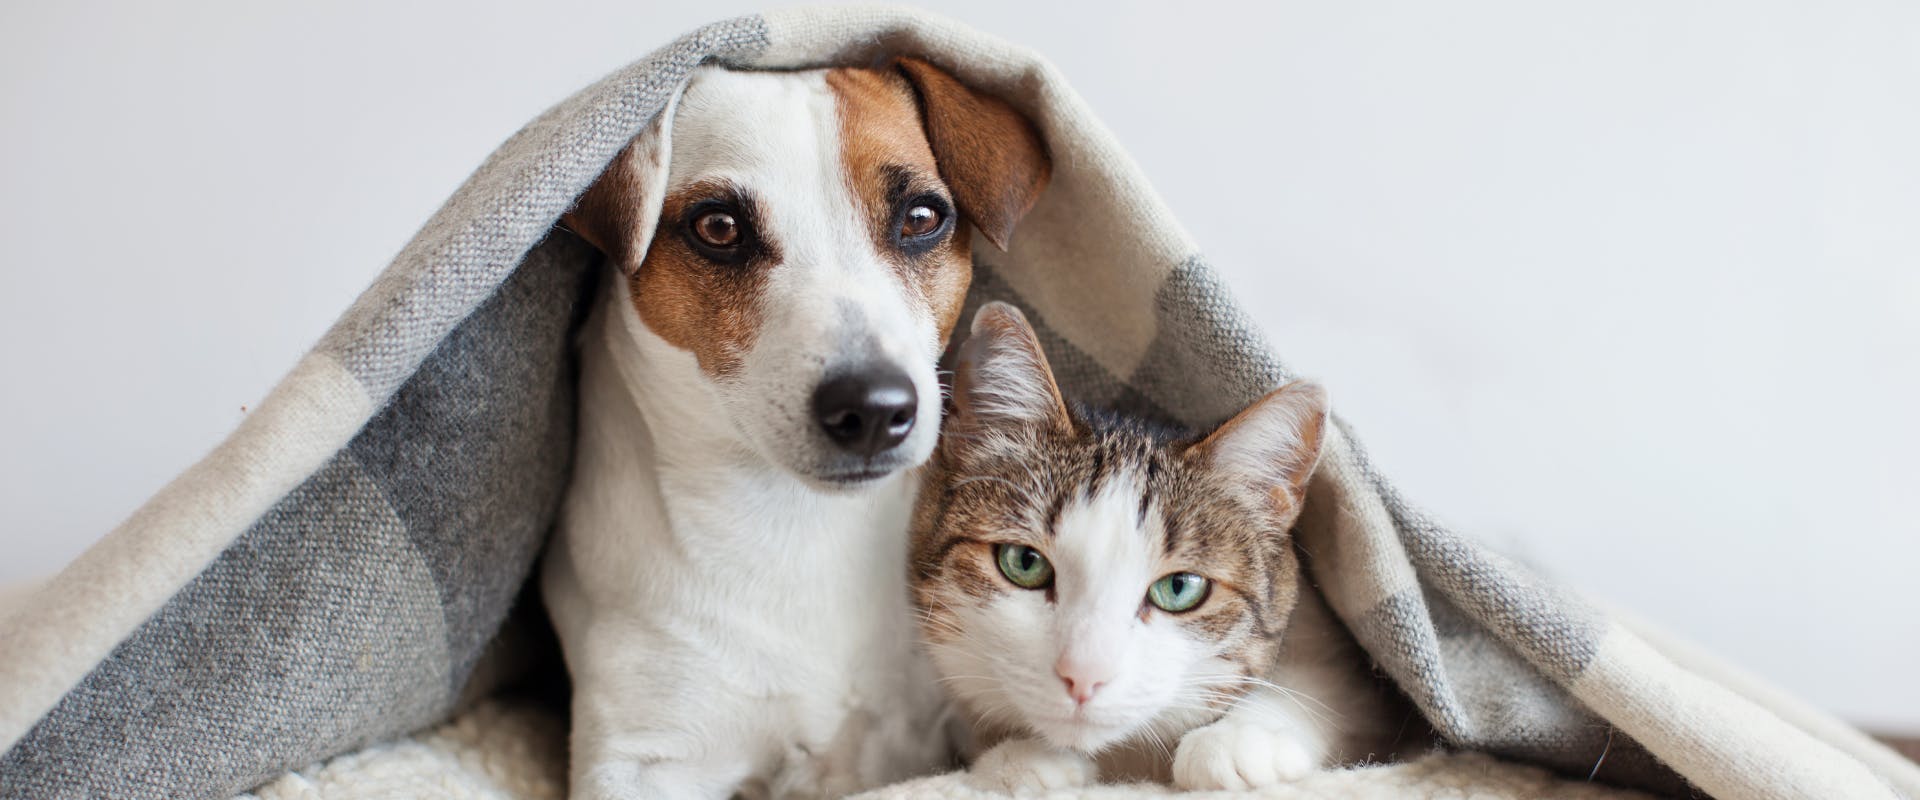 tabby cat and small terrier dog sat underneath a blanket together on a bed